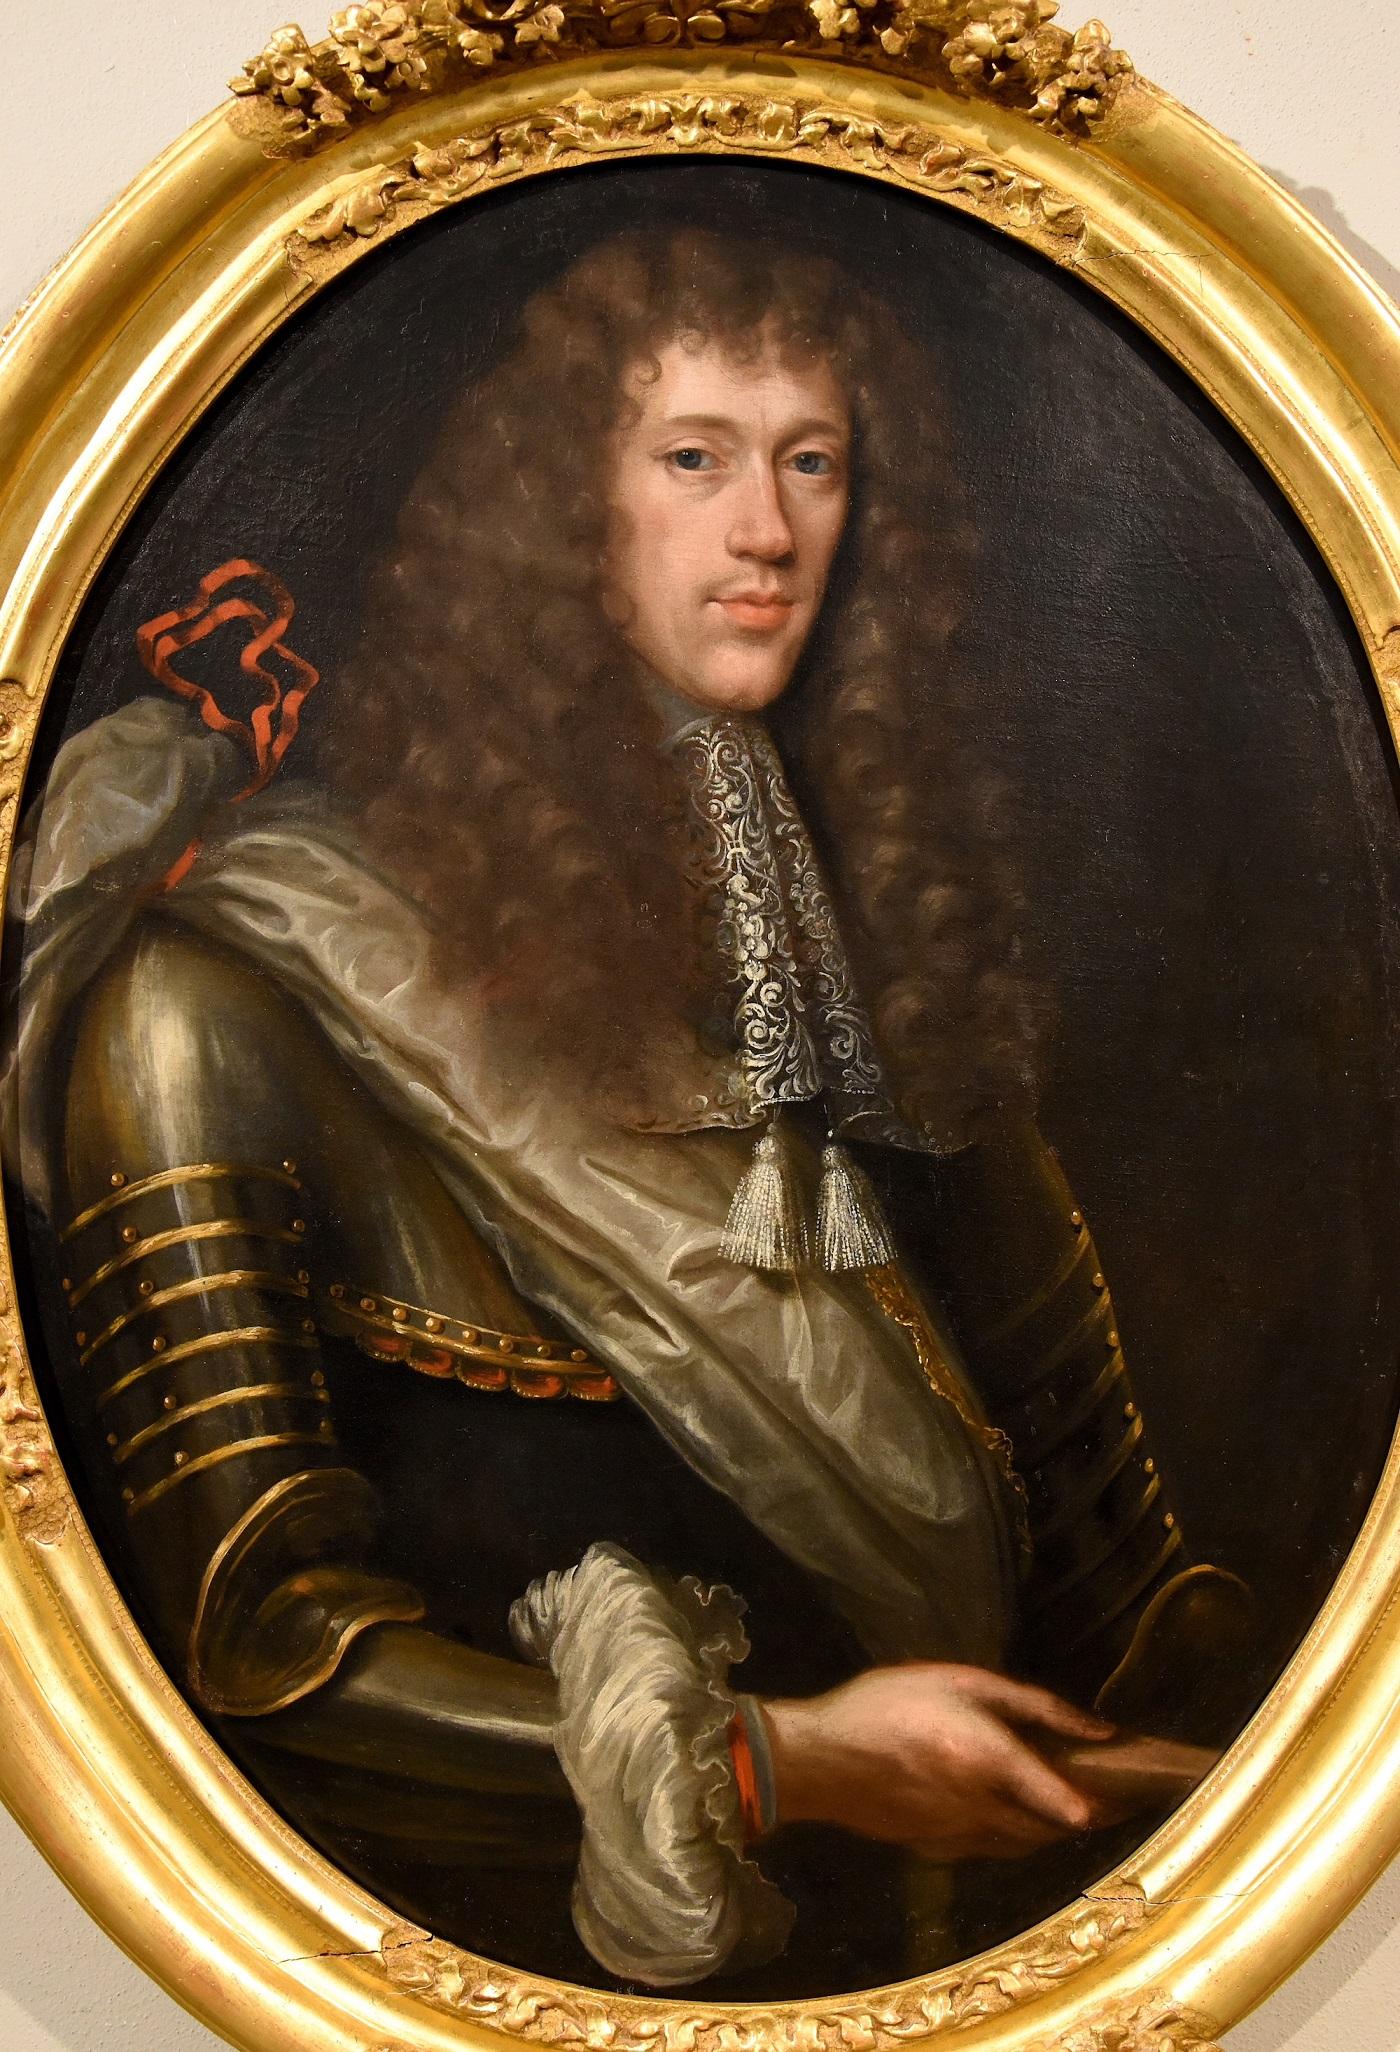 Portrait Gentleman Lefebvre Paint Oil on canvas Old master 17th Century French  - Old Masters Painting by Claude Lefebvre (Fontainebleau 1632 - Paris 1675)